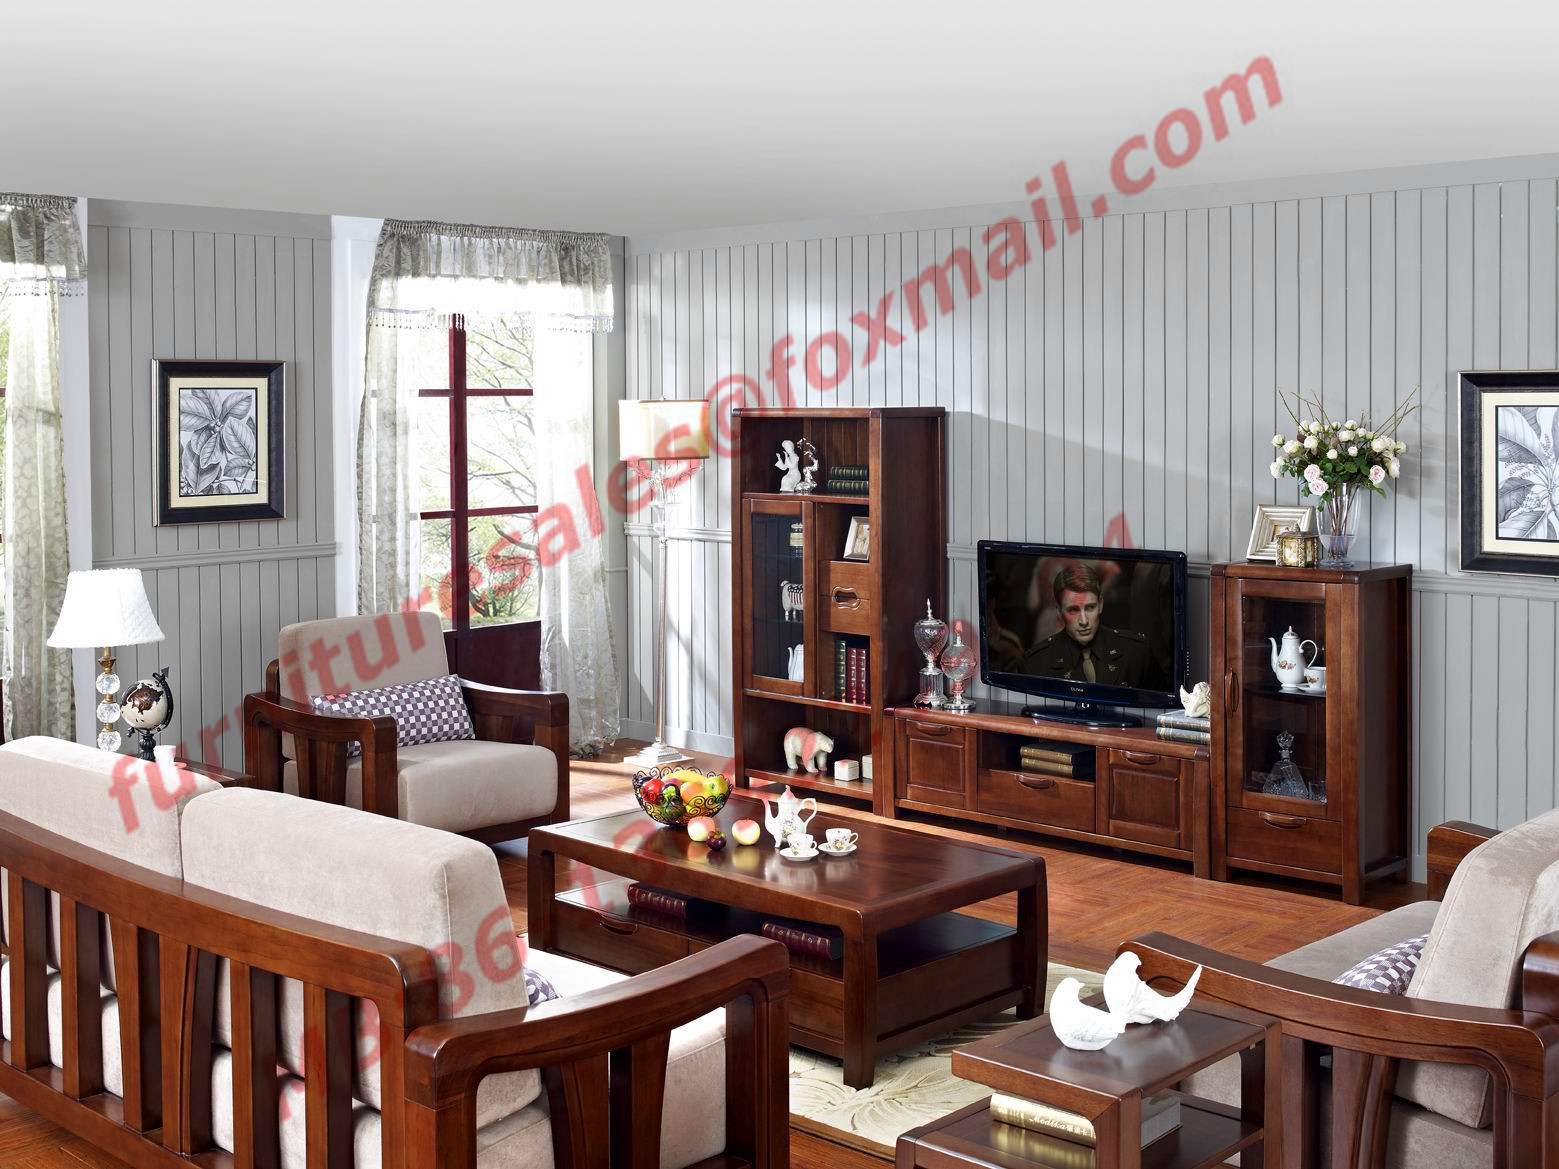 China High Quality Solid Wooden Frame with Upholstery Sofa Set wholesale